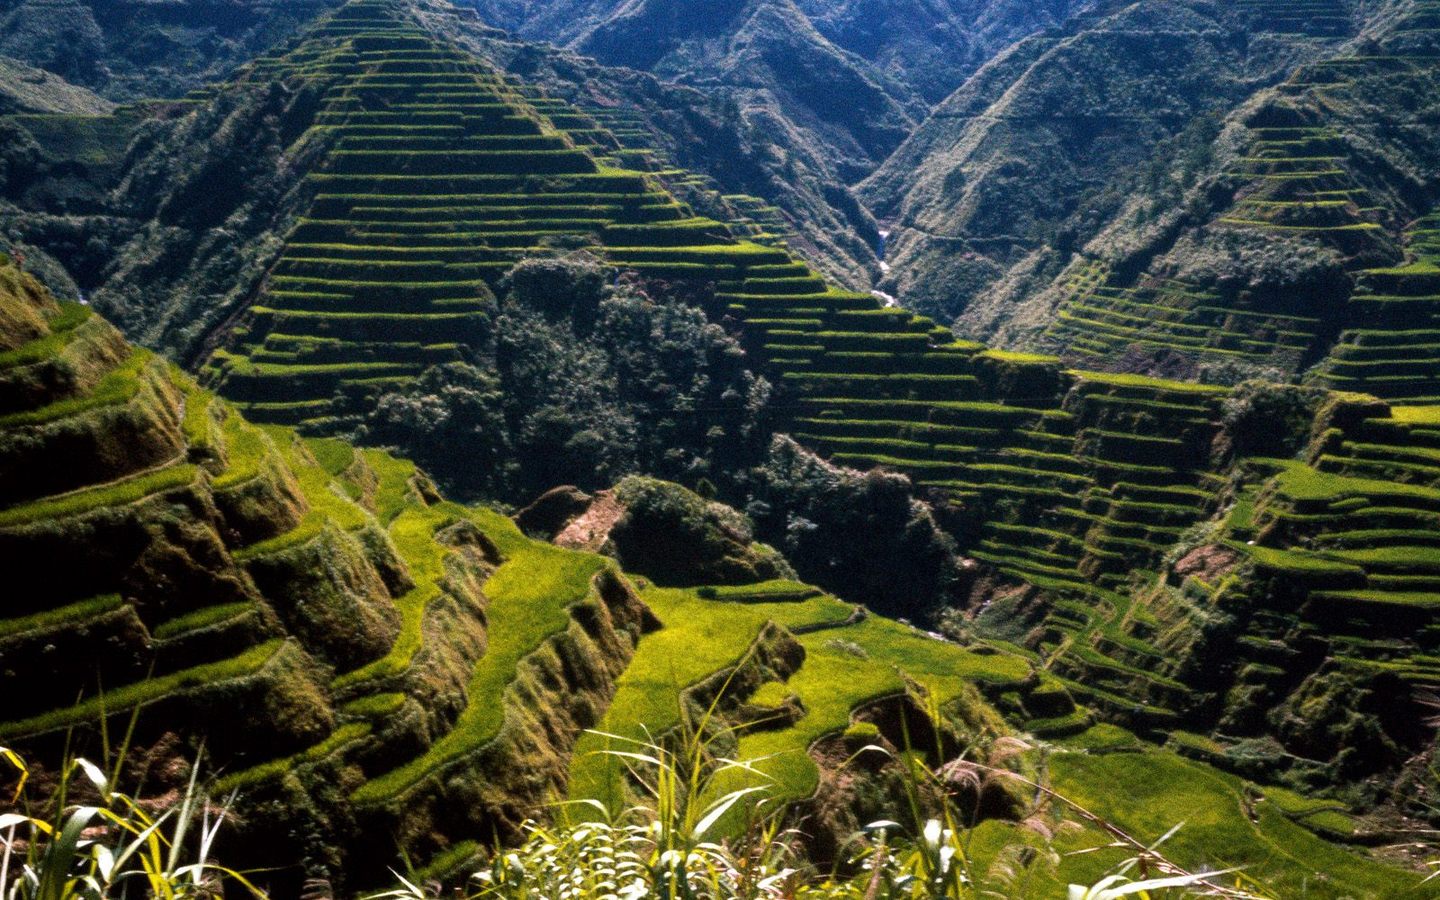 Hq Ancient Rice Terraces Philippines Wallpaper